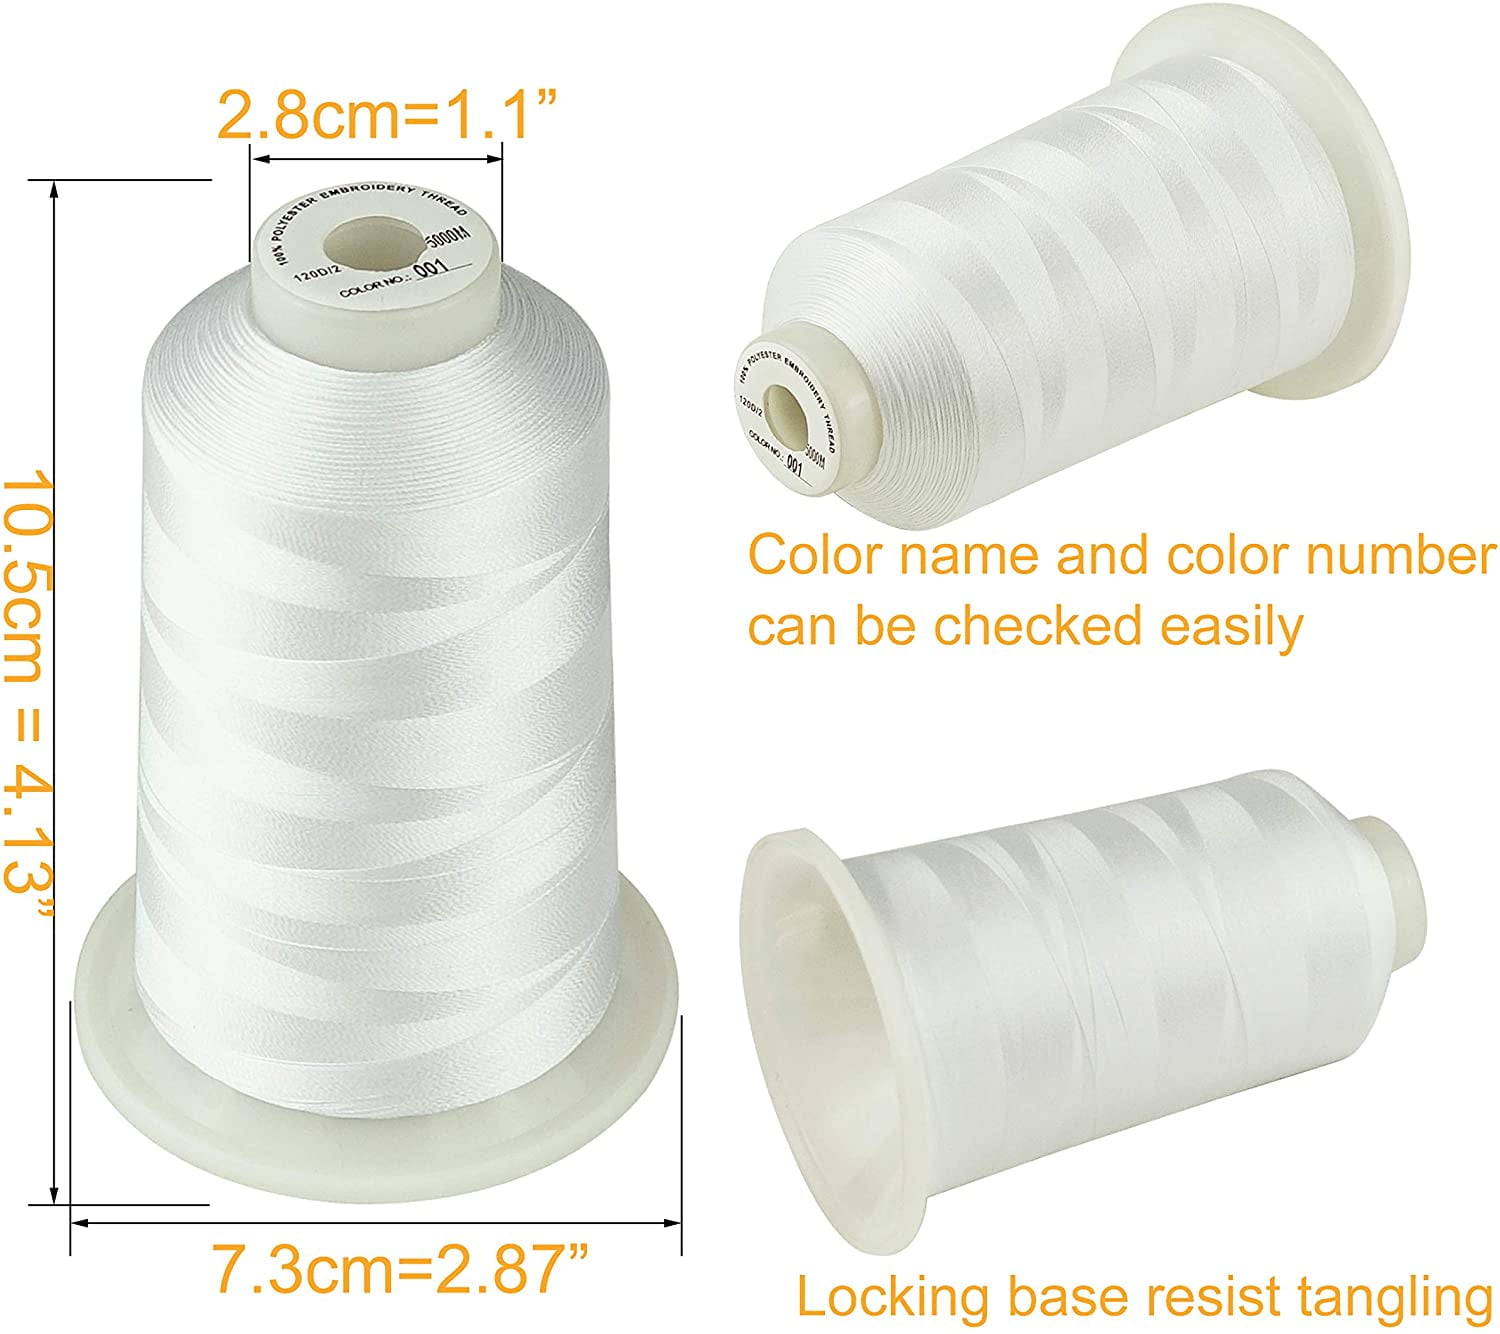 26 Selections Simthread 1White+1Black Various Assorted Color Packs of Polyester Embroidery Machine Thread Huge Spool 5500Y for All Purpose Sewing Embroidery Machines 